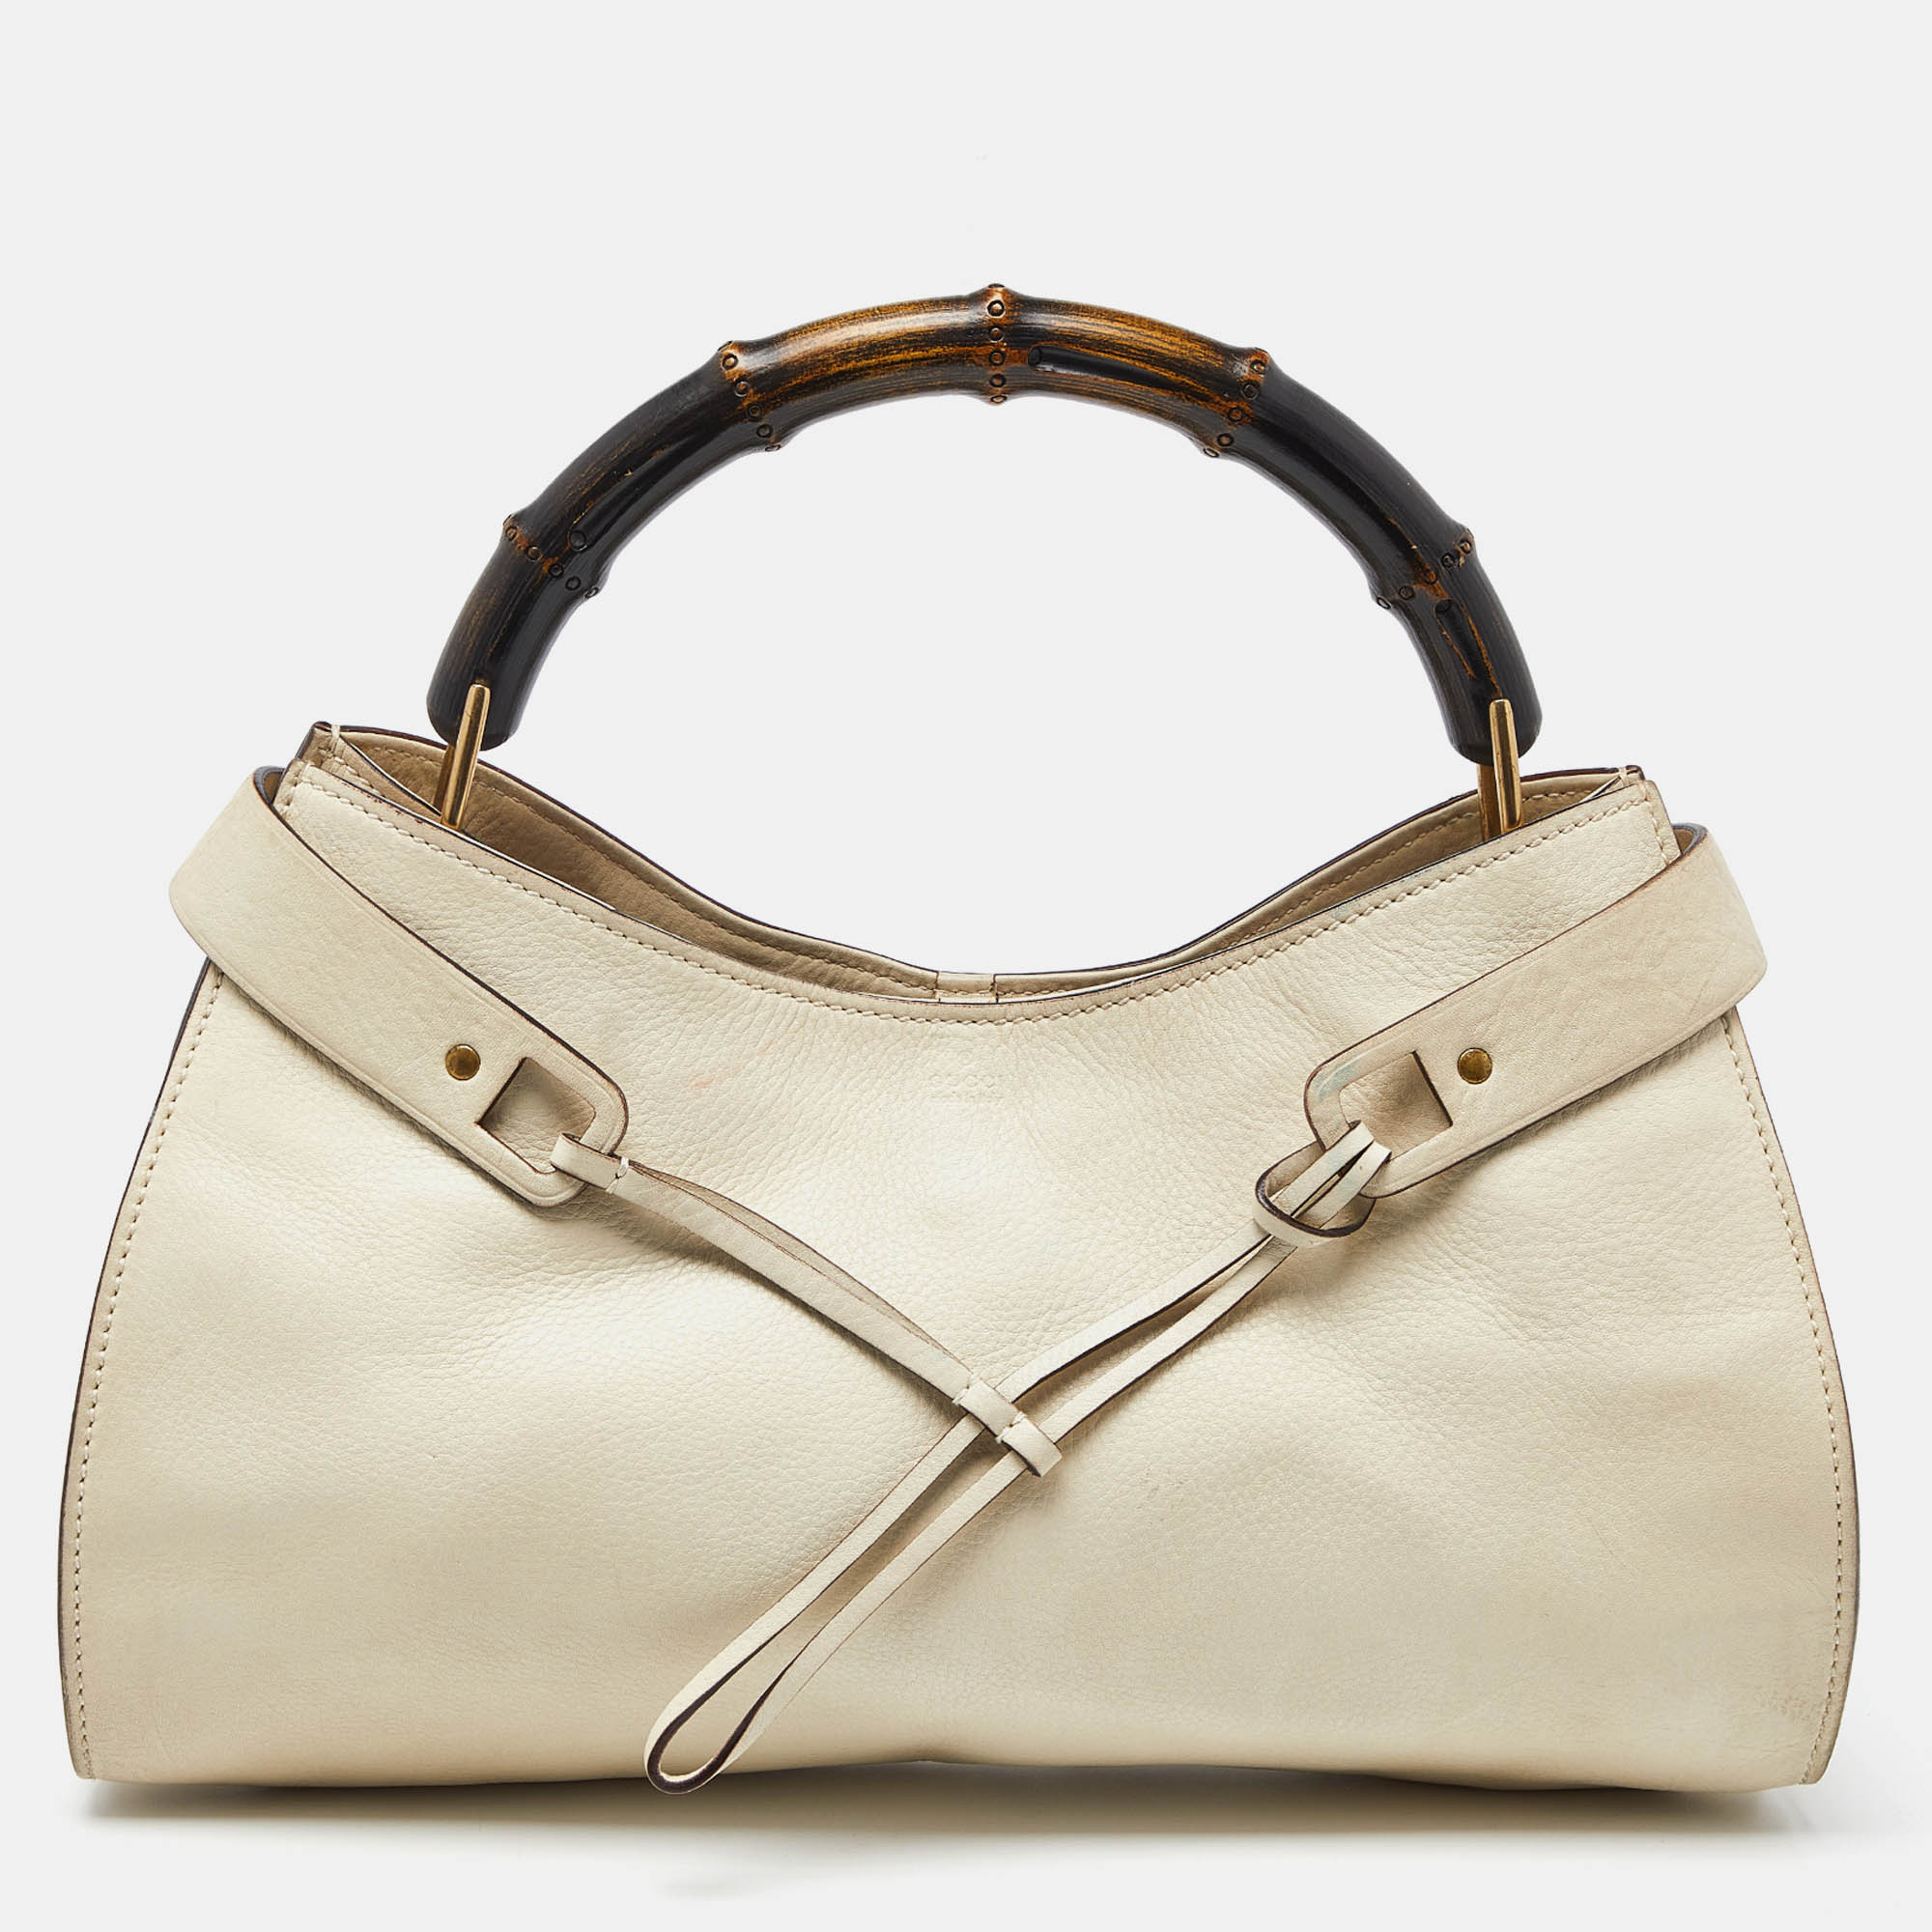 Pre-owned Gucci Cream Leather Bamboo Top Handle Bag